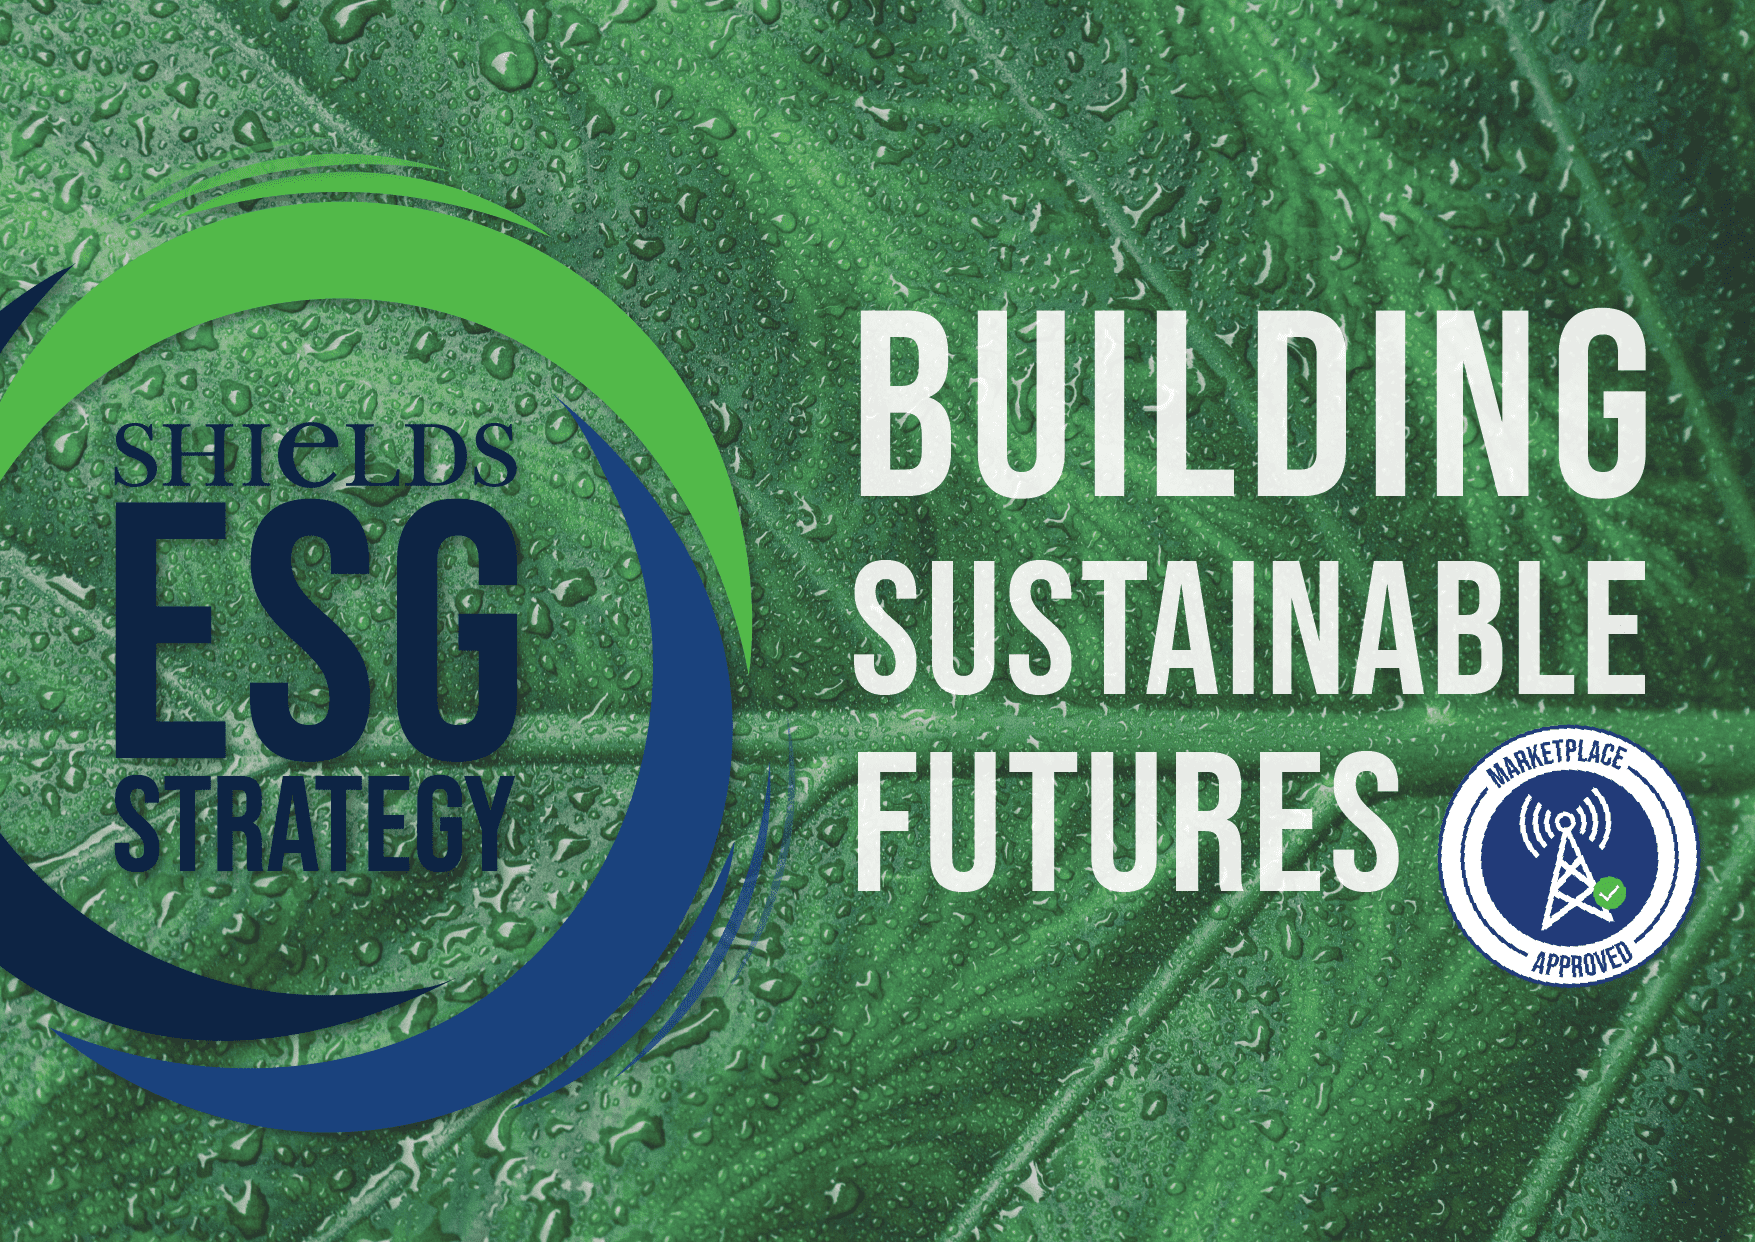 Shields Building Sustainable Futures: The Circular Economy, ESG, Recycling and Telecoms